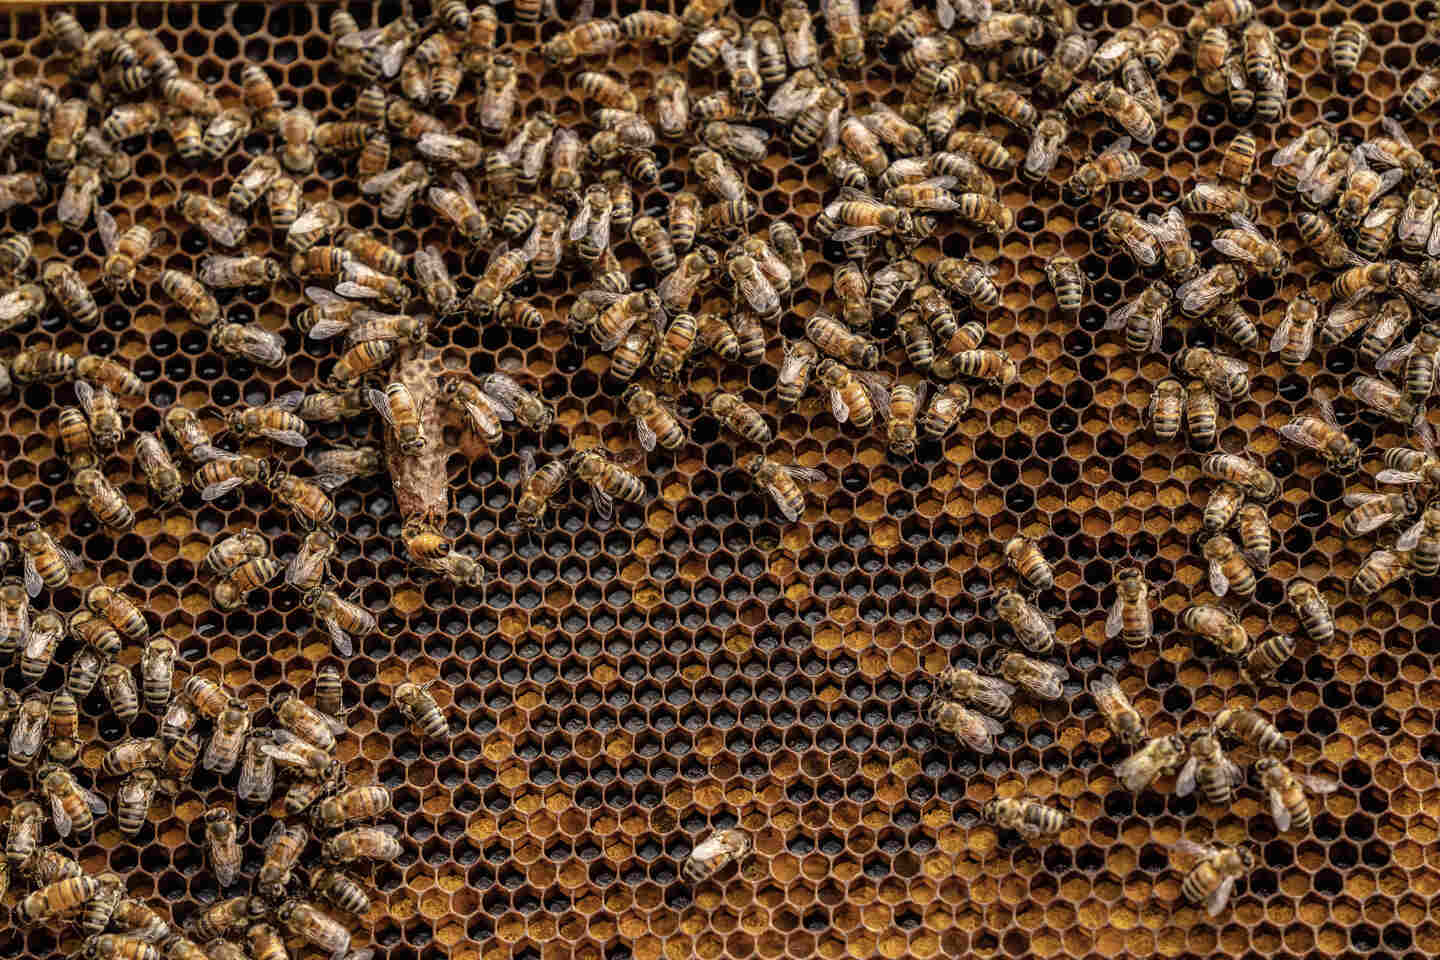 Image of beehive, bees and honeycomb.